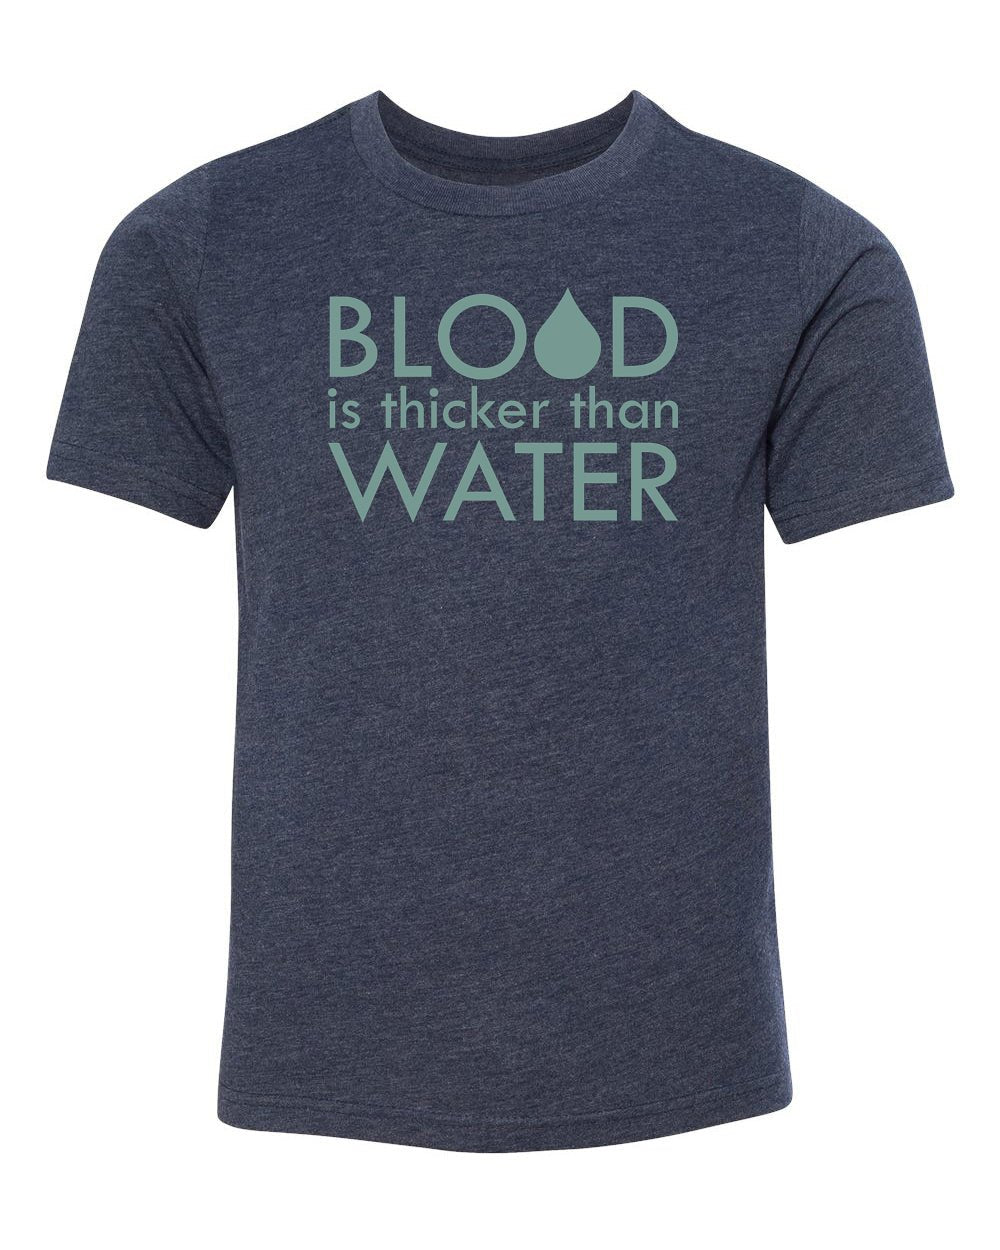 Blood Is Thicker Than Water Kids T Shirts - Mato & Hash